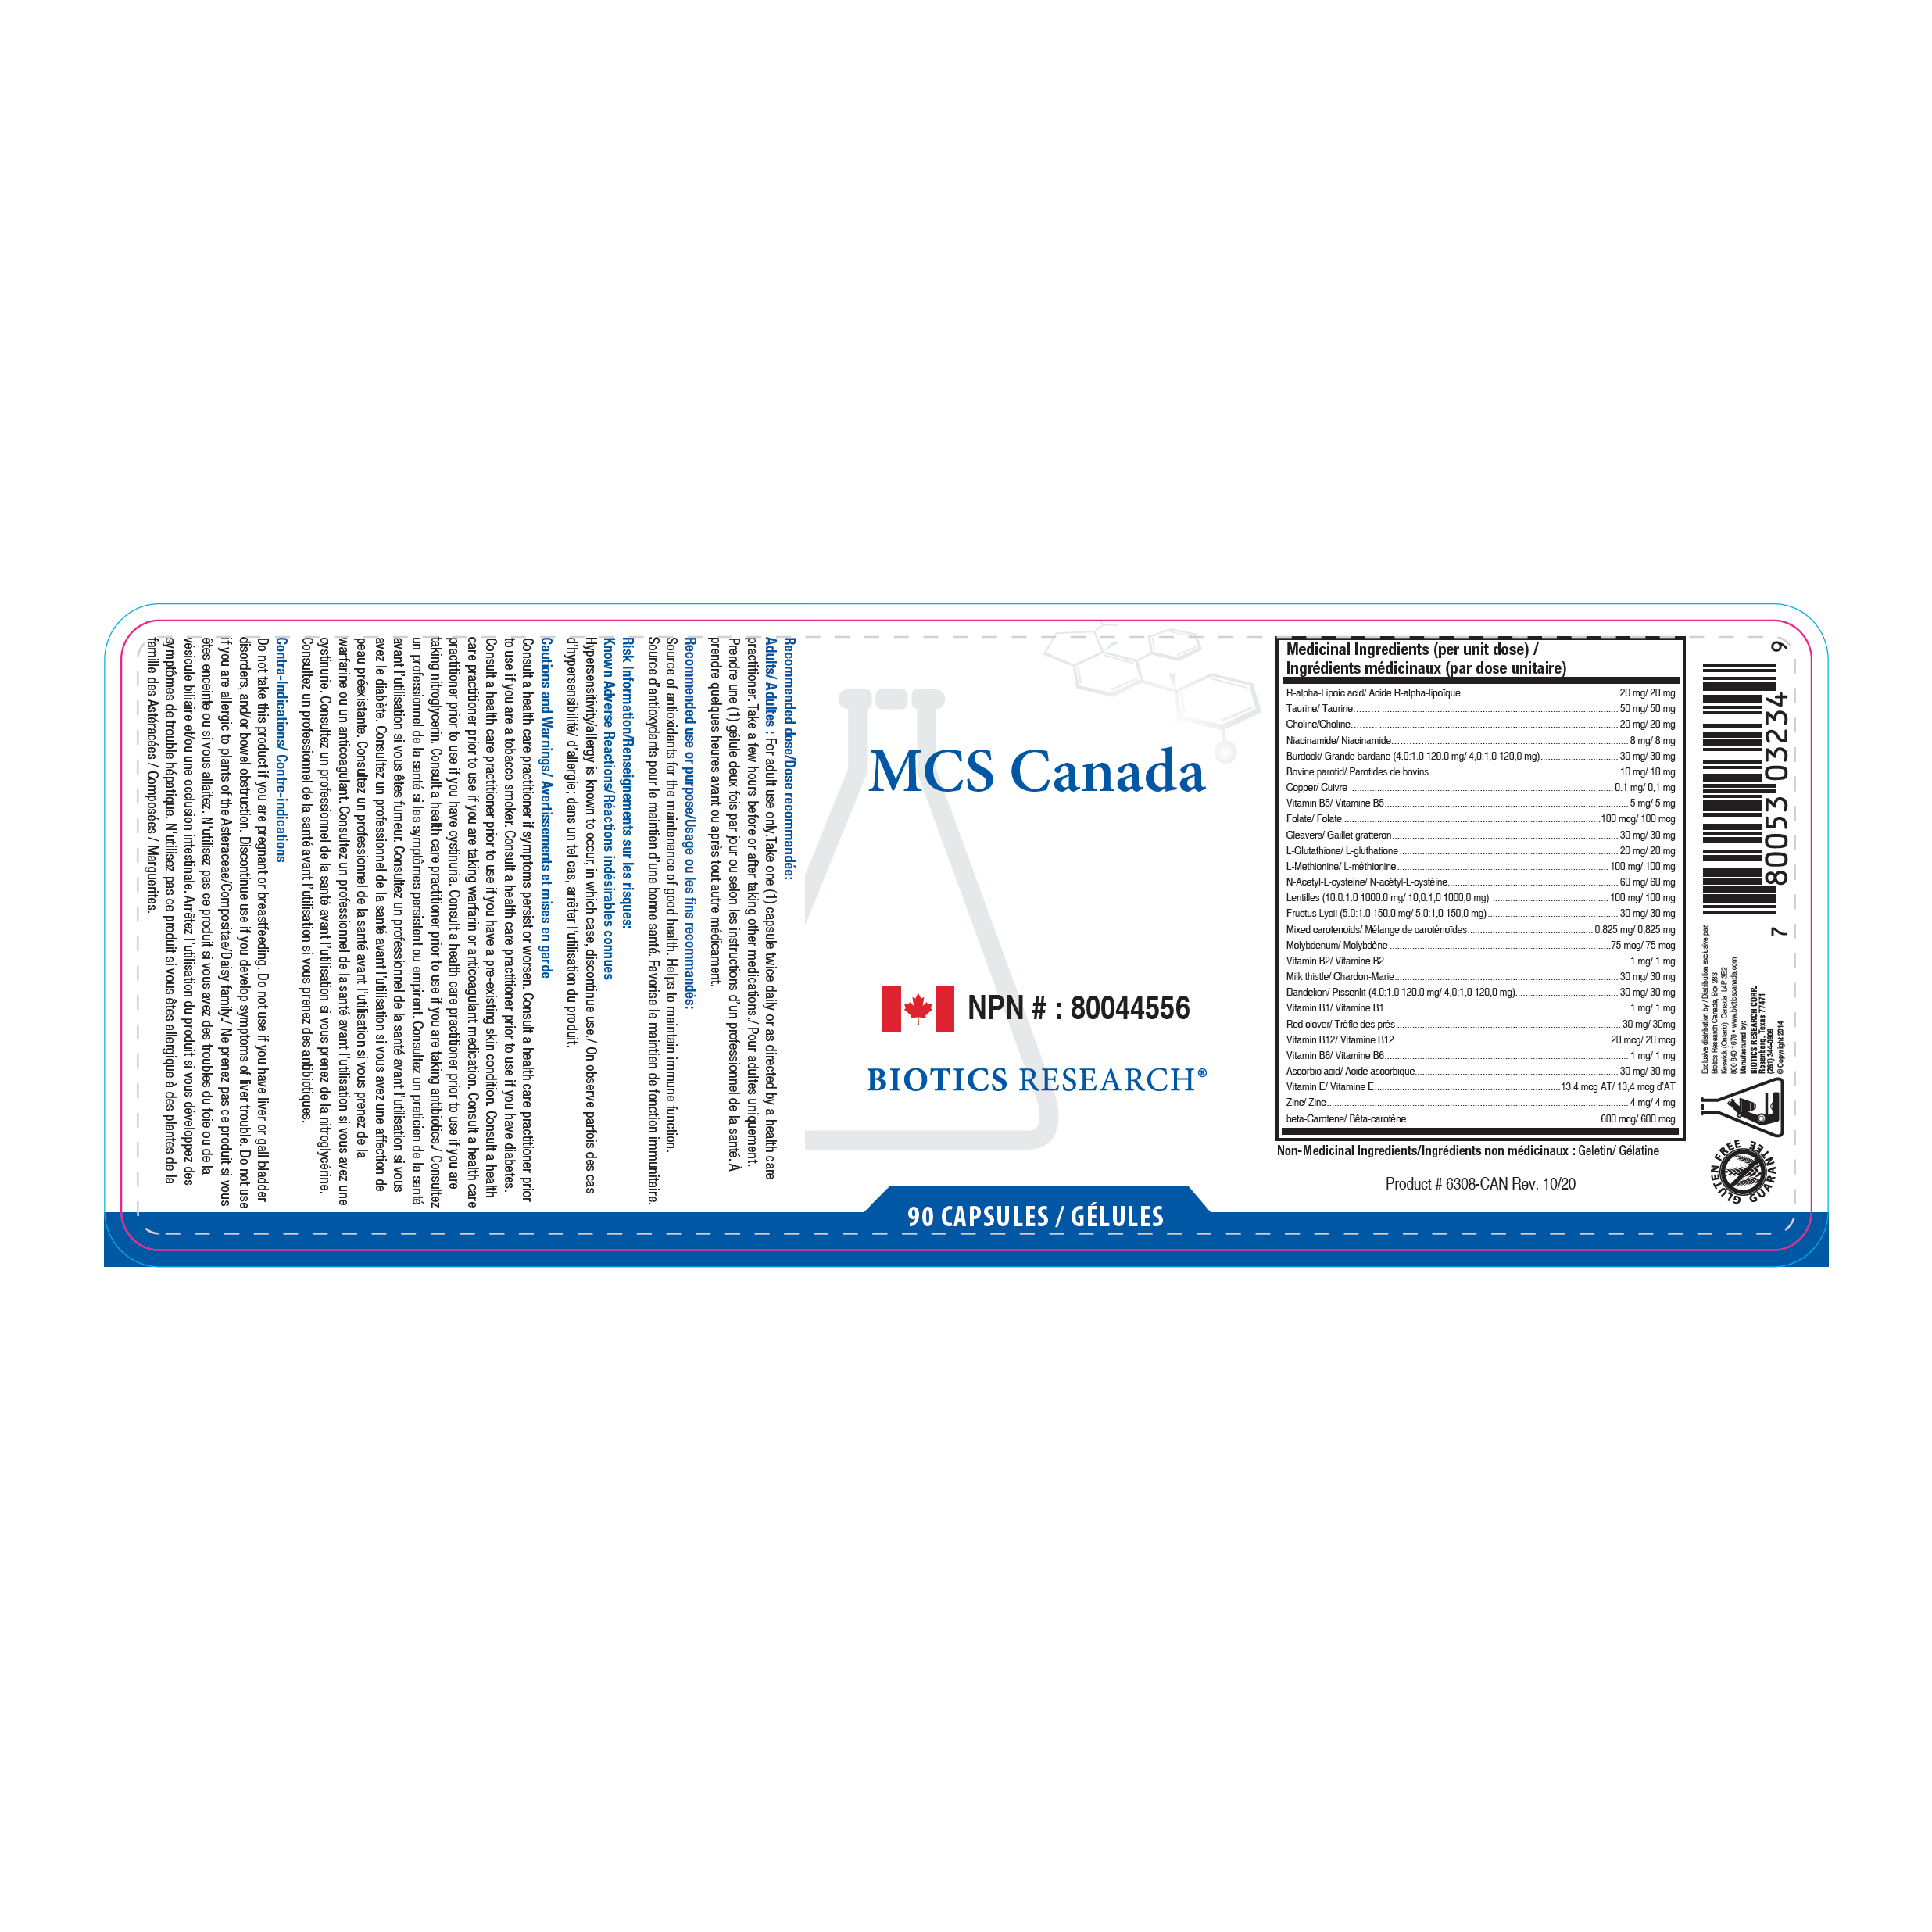 MCS Canada (Metabolic Clearing Support)